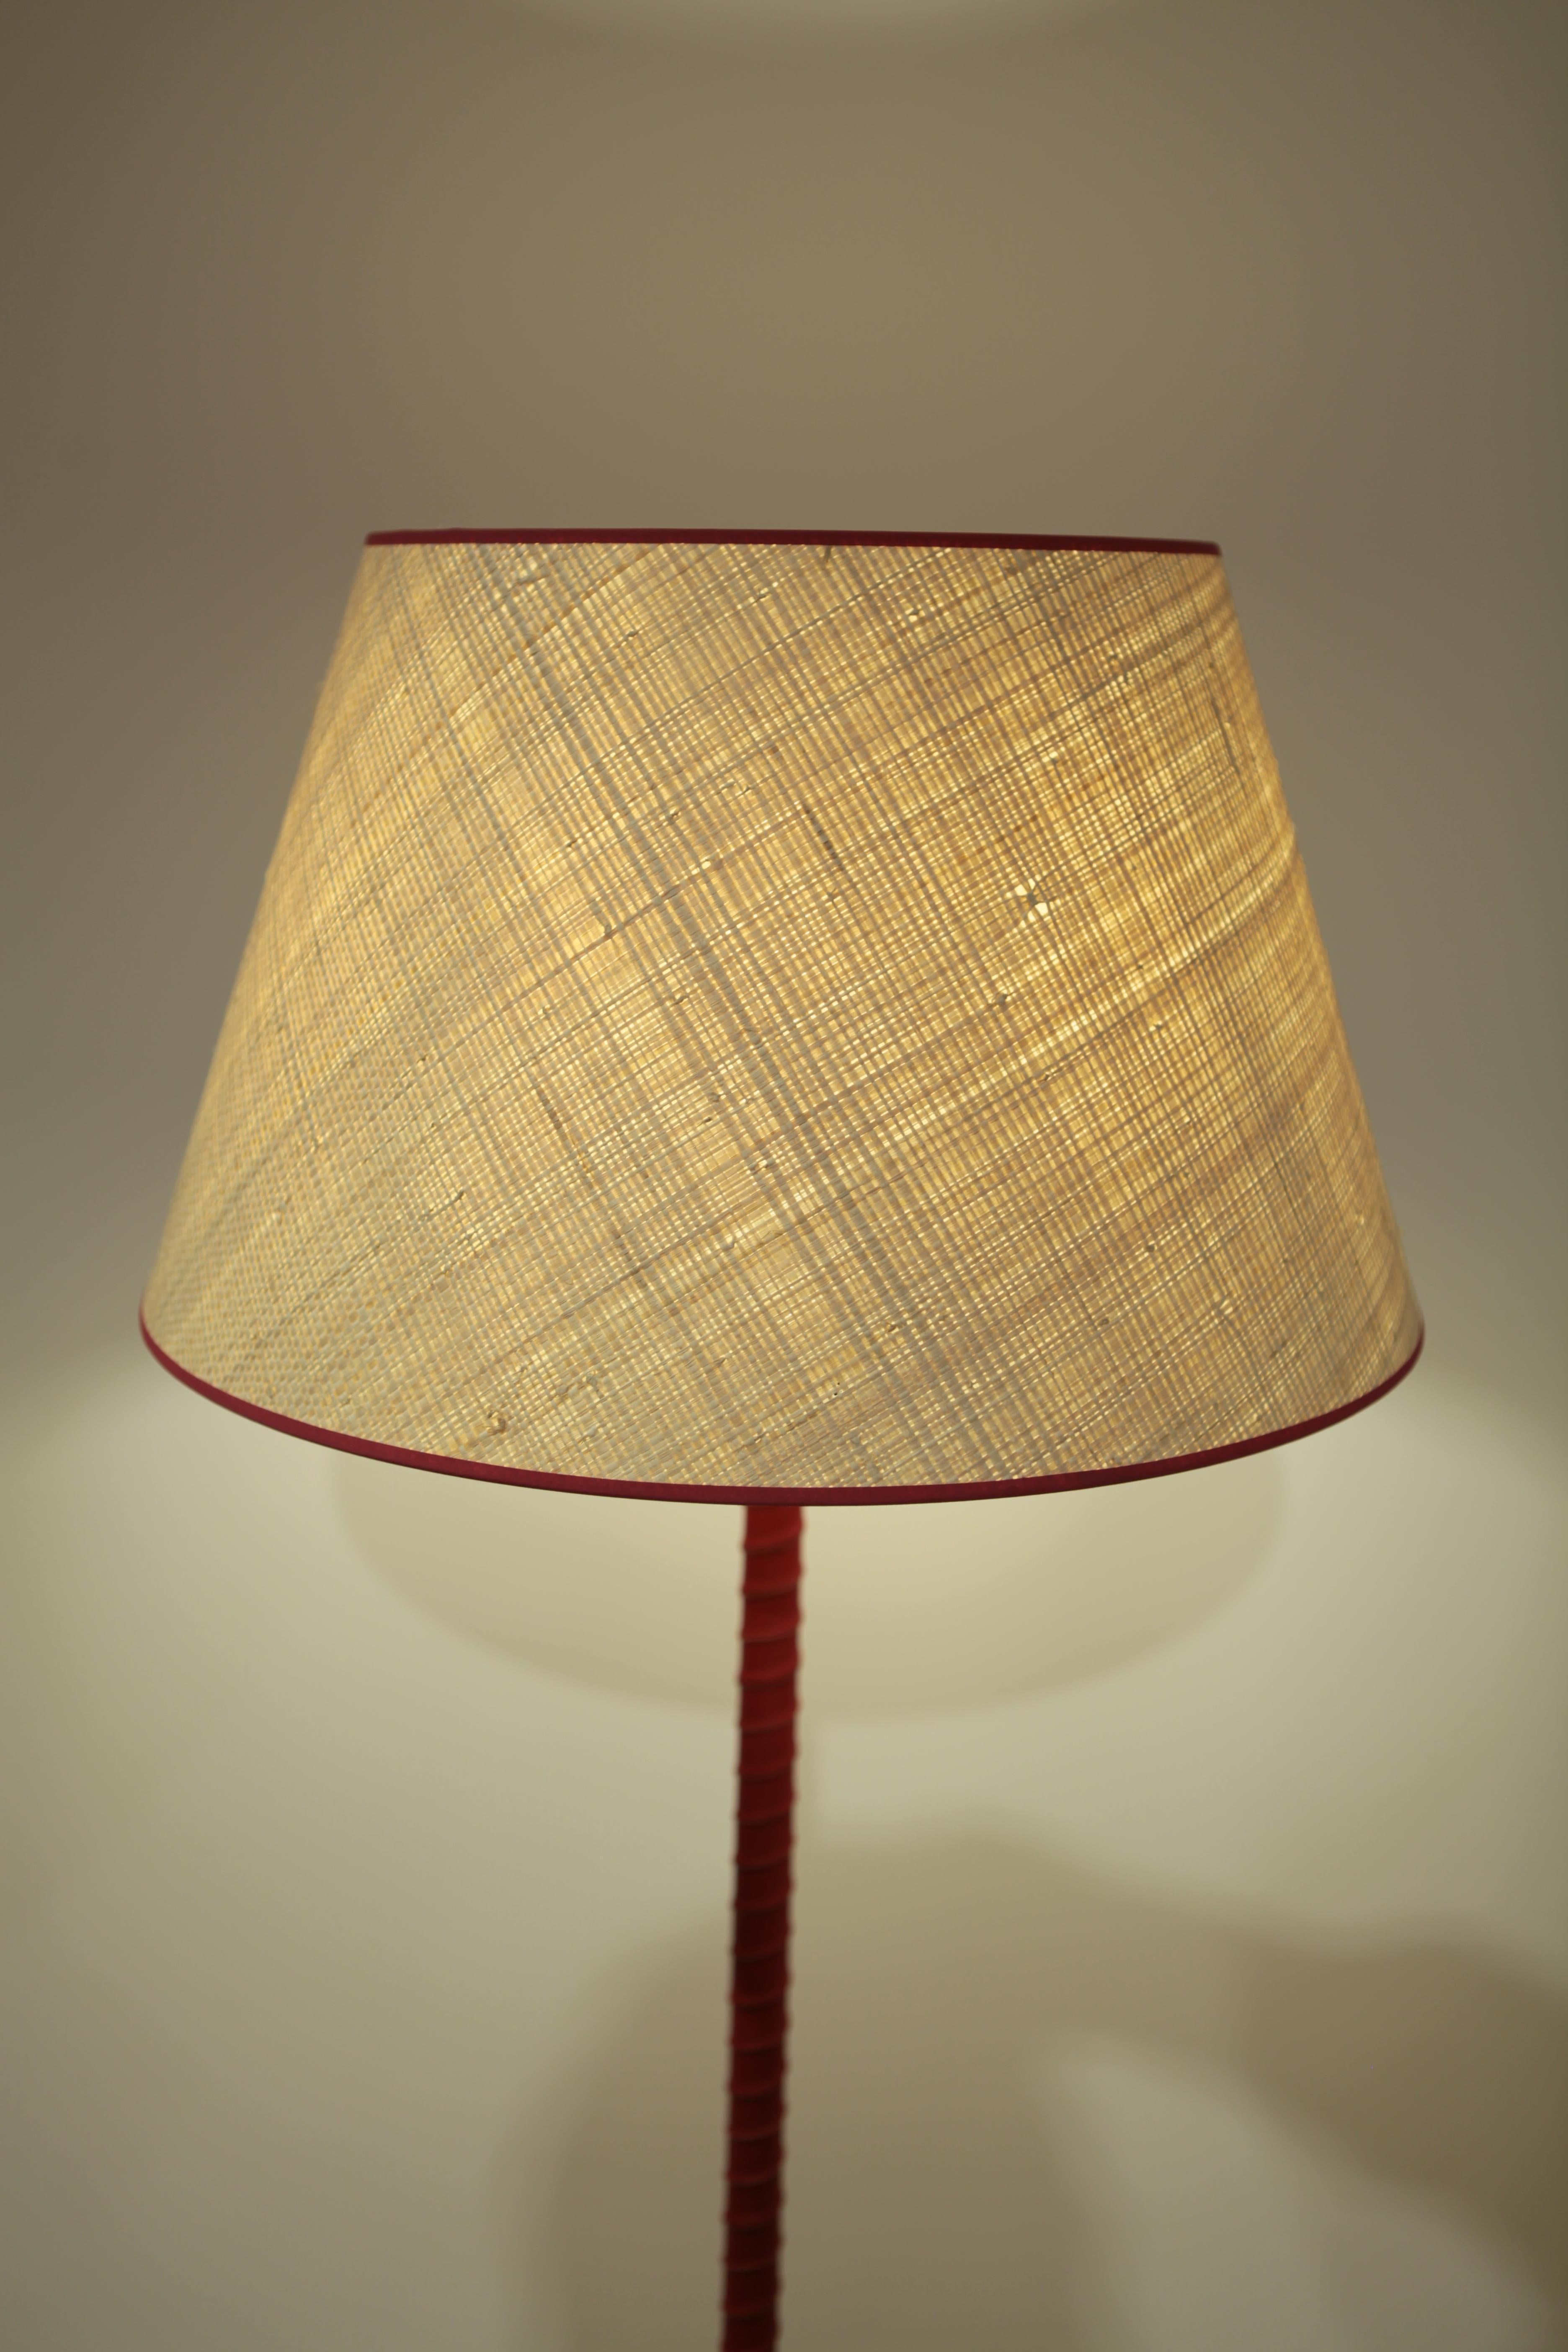 Lisa Johansson-Pape, floor lamp manufactured by Orno in Finland in the 1940s.
Brass base and red leather covered pole.
Handmade Raffia shade with red trimming.
Excellent condition.